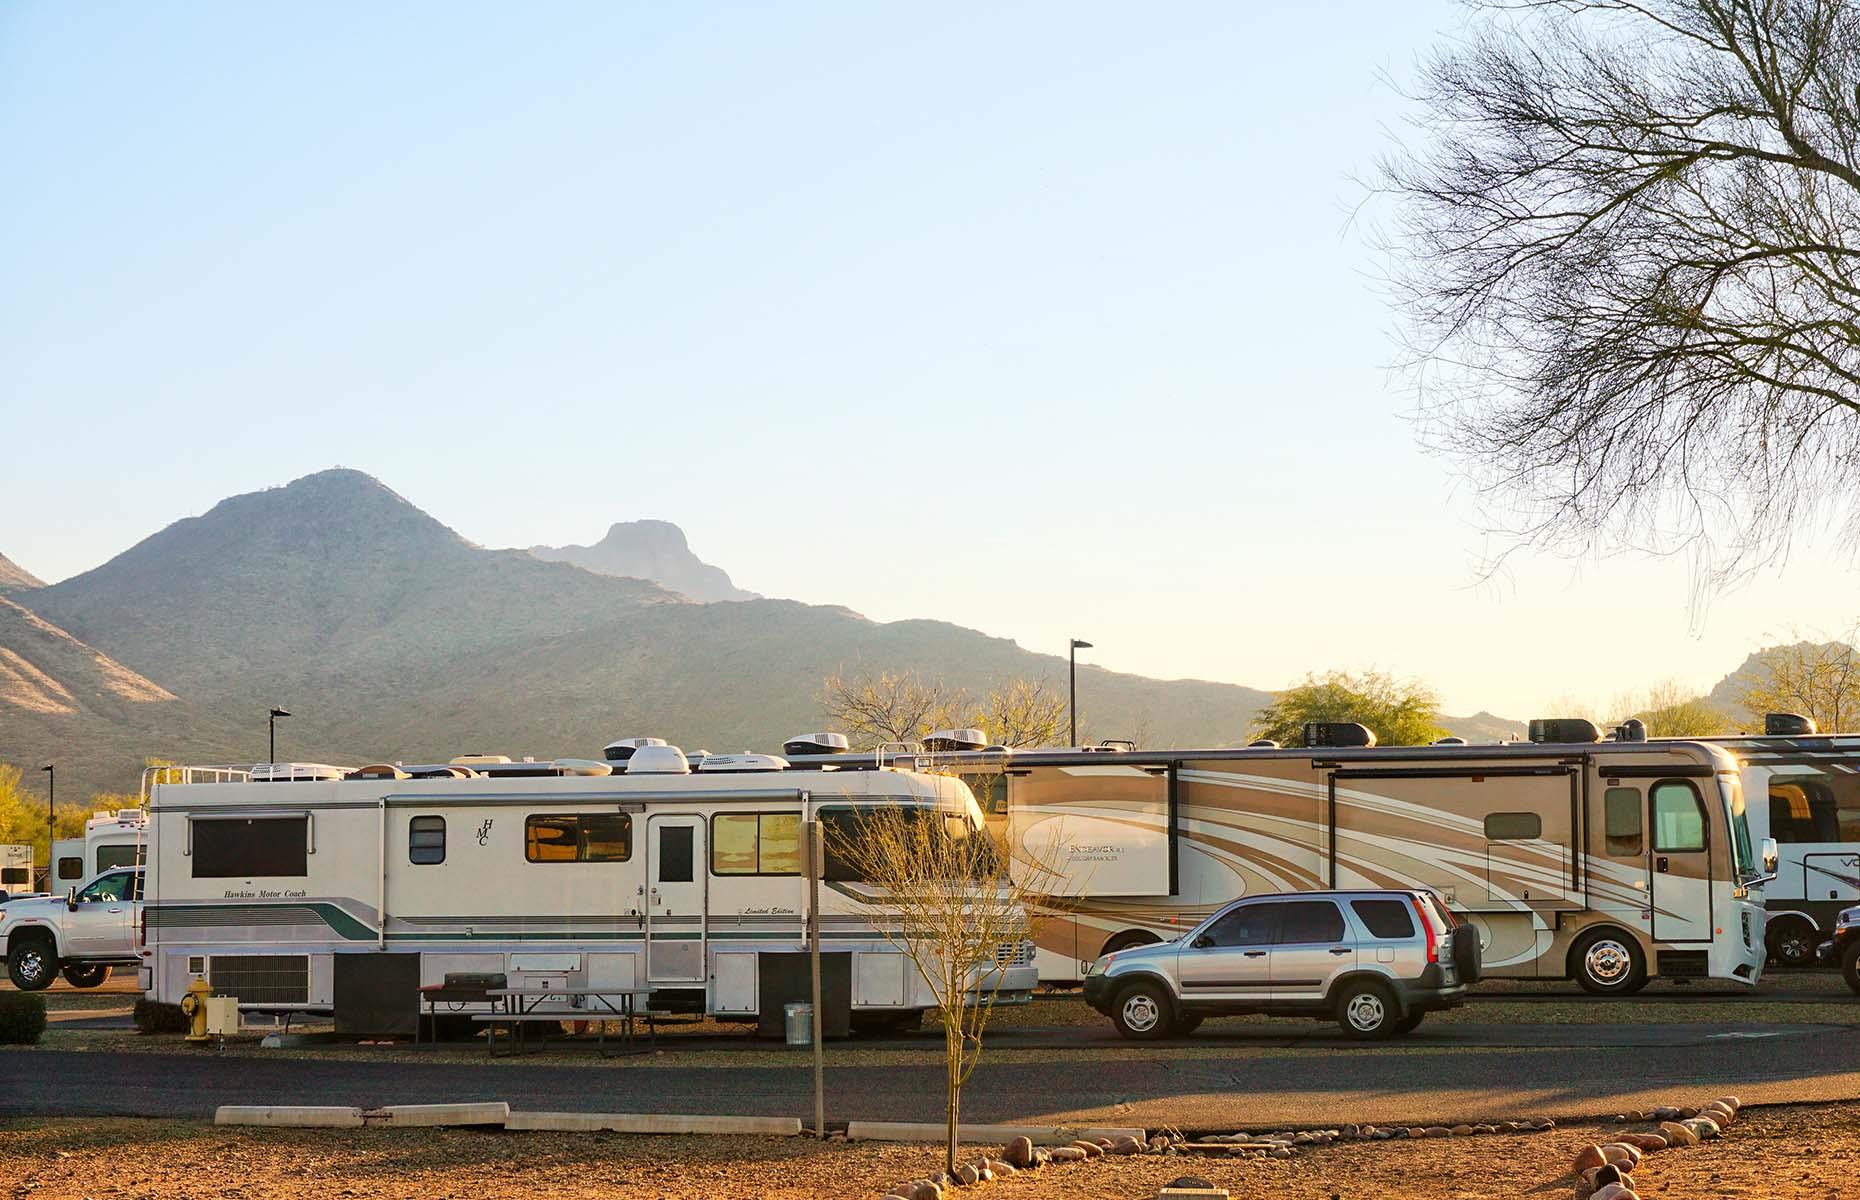 <p>In fact, the popularity of the RV vacation surged so much that rental company RVshare <a href="https://www.lonelyplanet.com/articles/rv-travel-trend">cited a 1,000% increase</a> in bookings from April to mid-May in 2020. This renewed appeal led to packed-out campsites (most also had limits on capacity) and crowded national parks, as providers struggled to cope with demand. This 2021 photo shows a busy RV site in Scottsdale, Arizona.</p>  <p><strong><a href="https://www.loveexploring.com/galleries/77699/rv-heaven-the-best-place-to-stay-in-every-state-with-your-motorhome">Here's the best place to stay with a RV in every US state</a></strong></p>